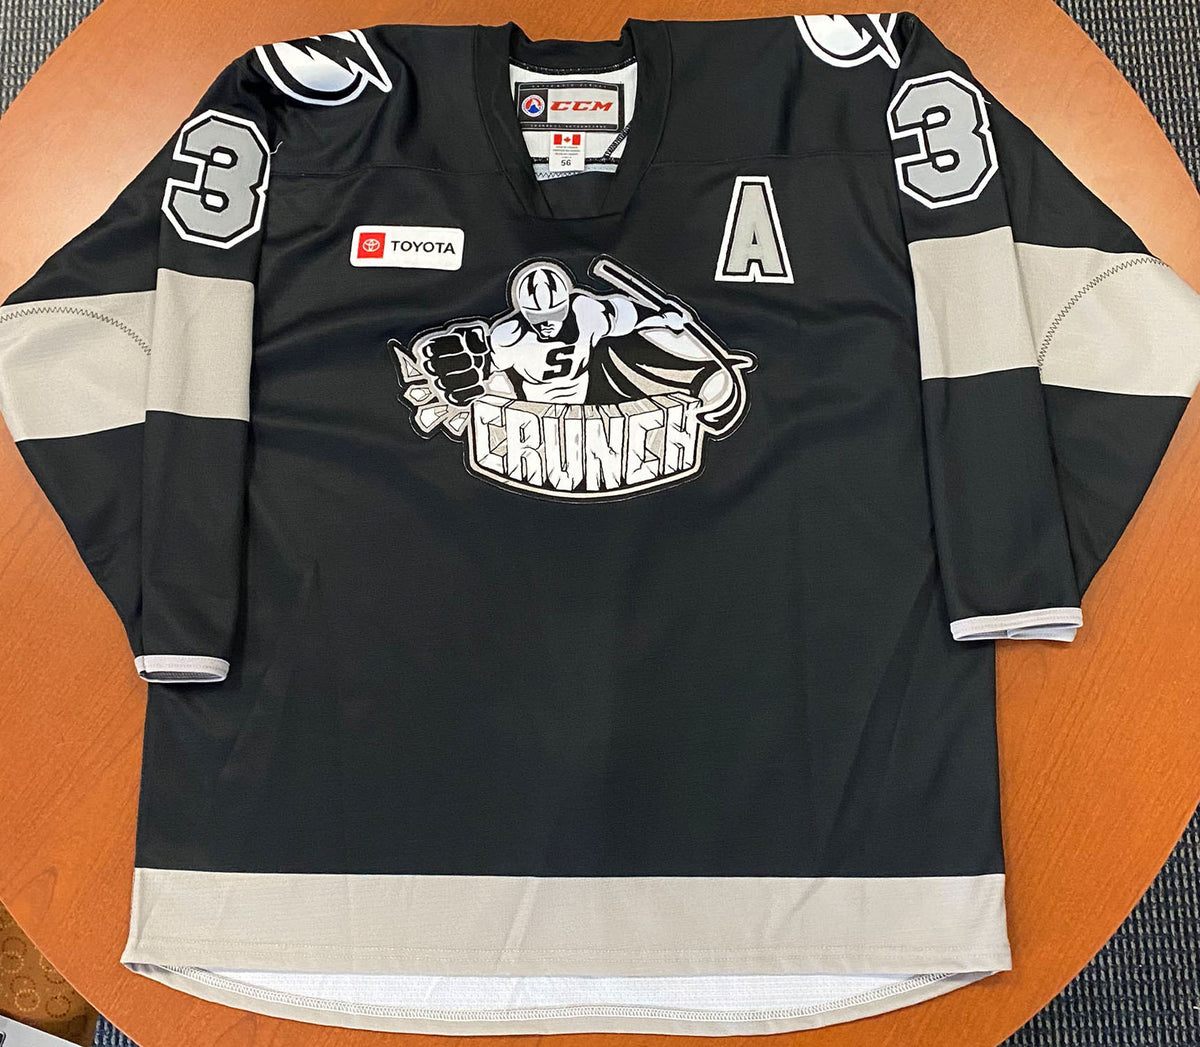 BARRACUDA BLACKOUT NIGHT FEATURING GIVEAWAY JERSEY SET FOR 3/10